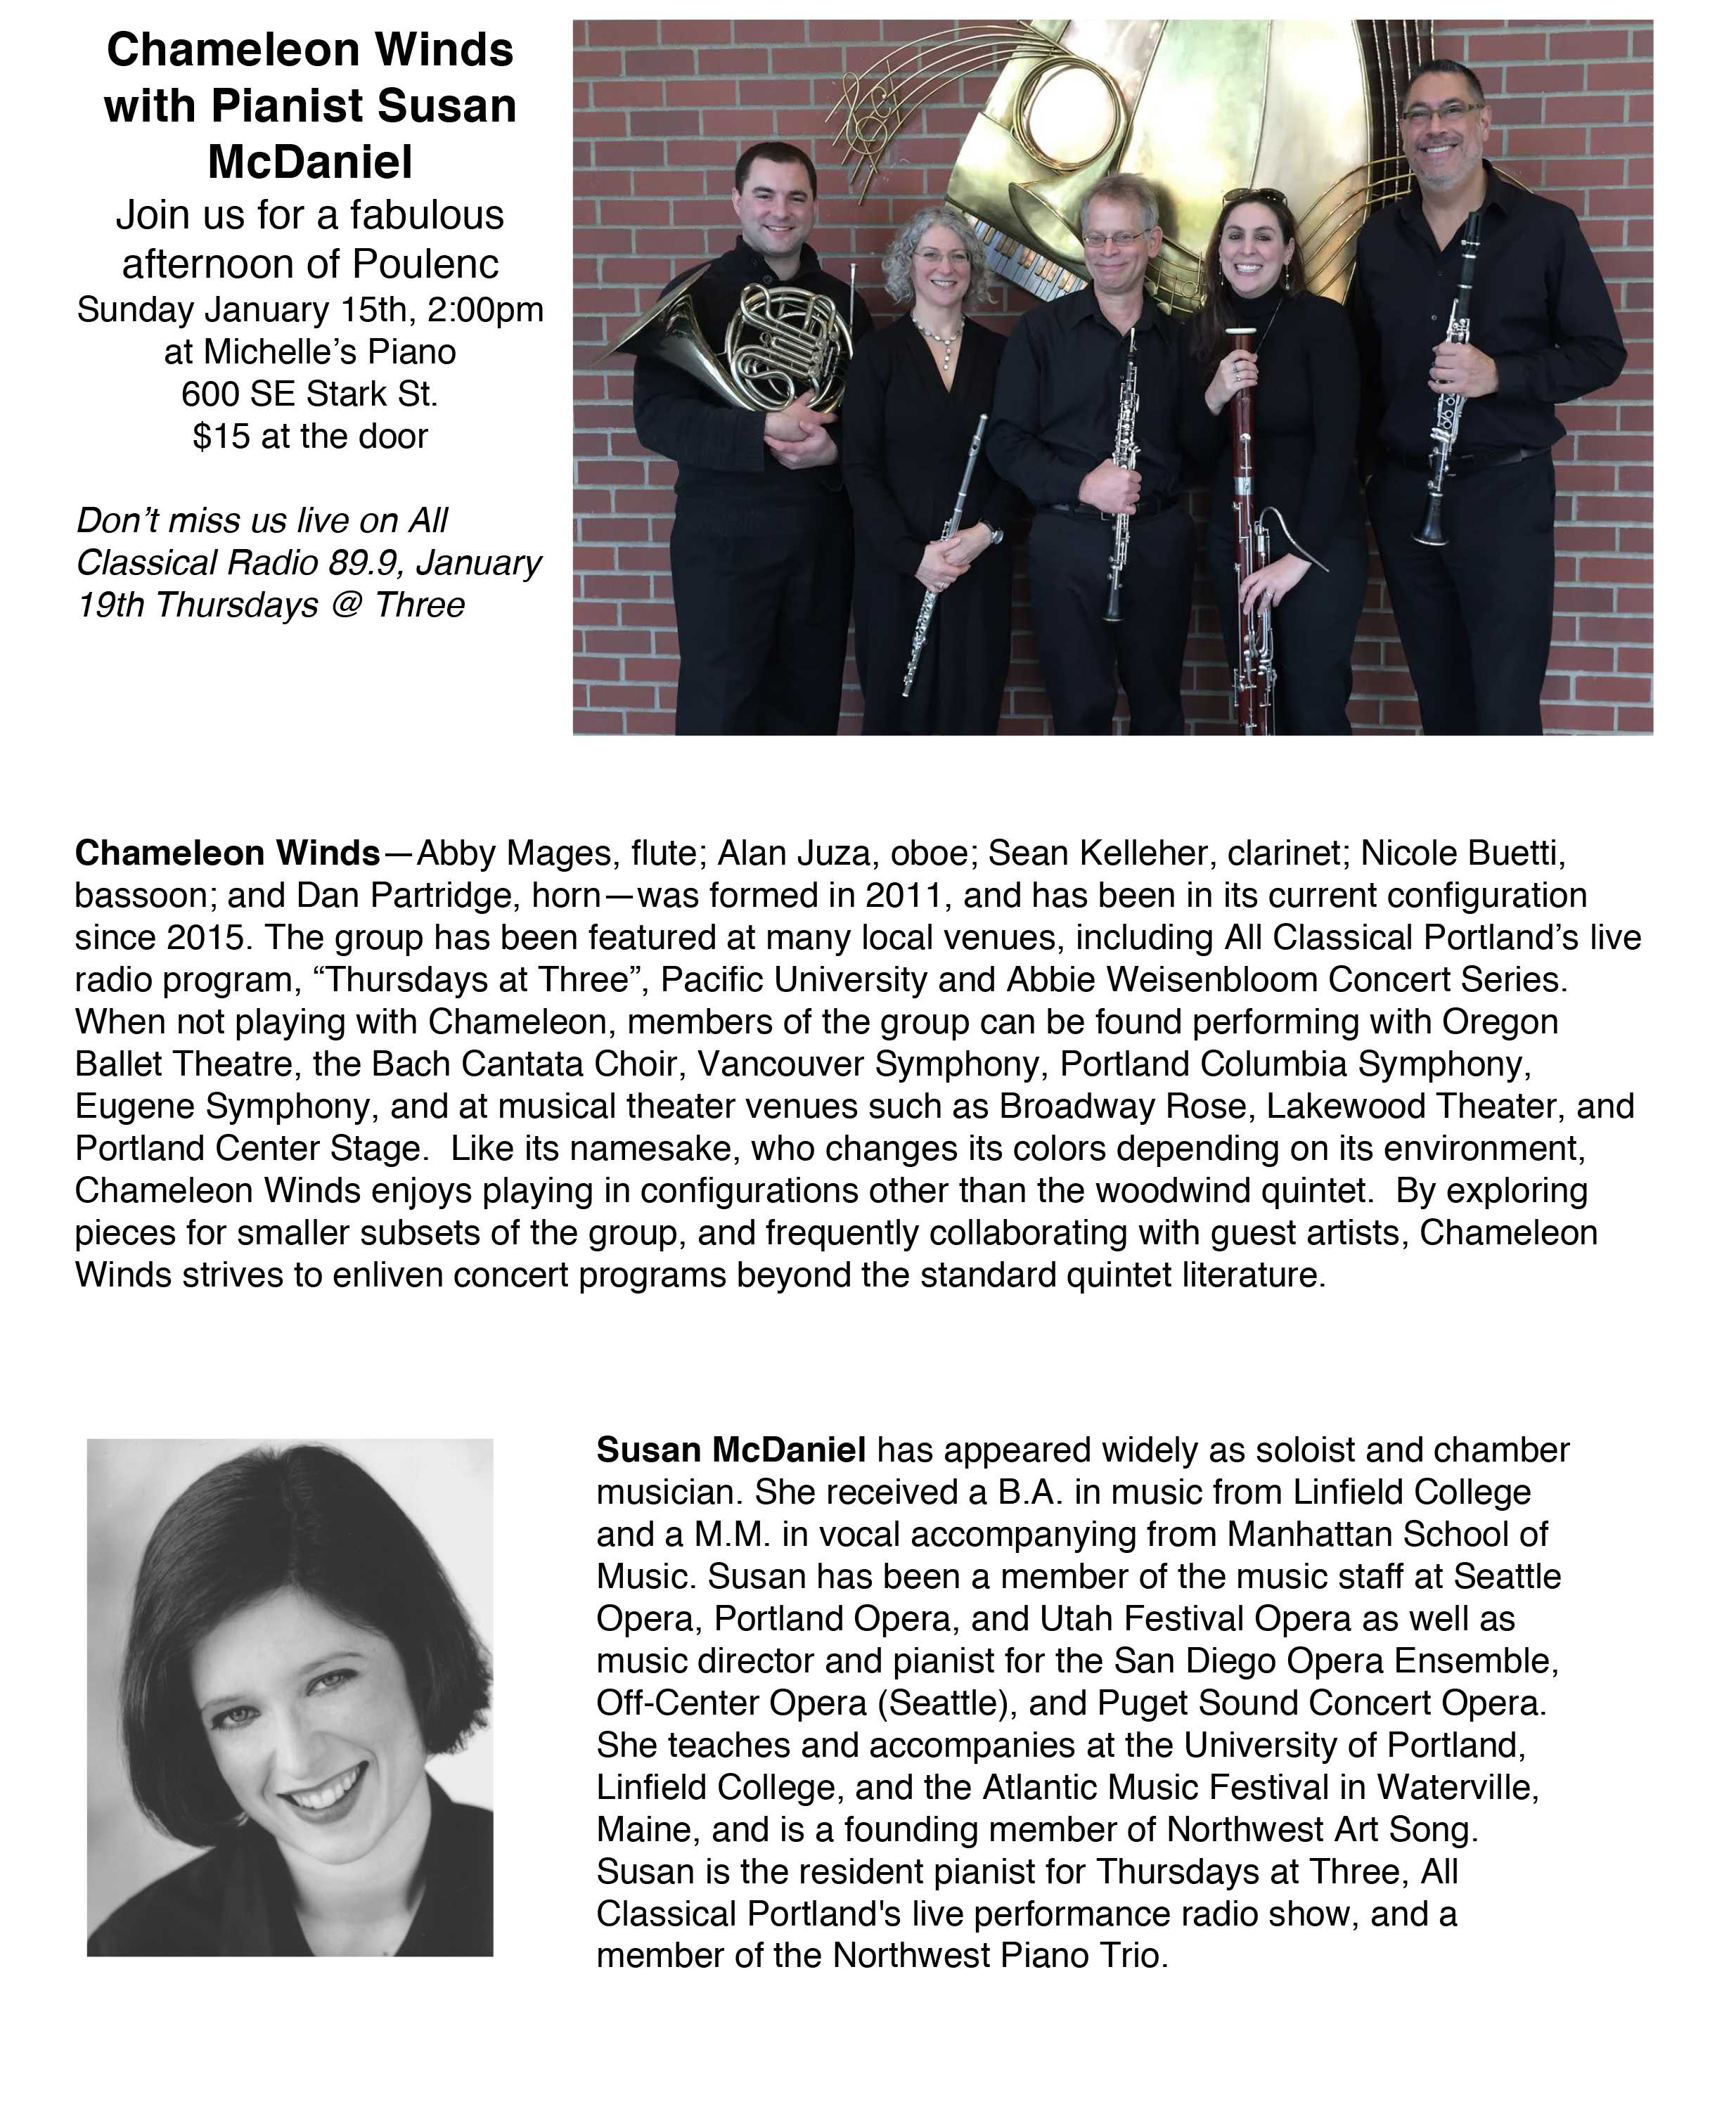 Chameleon Winds with Pianist Susan McDaniel